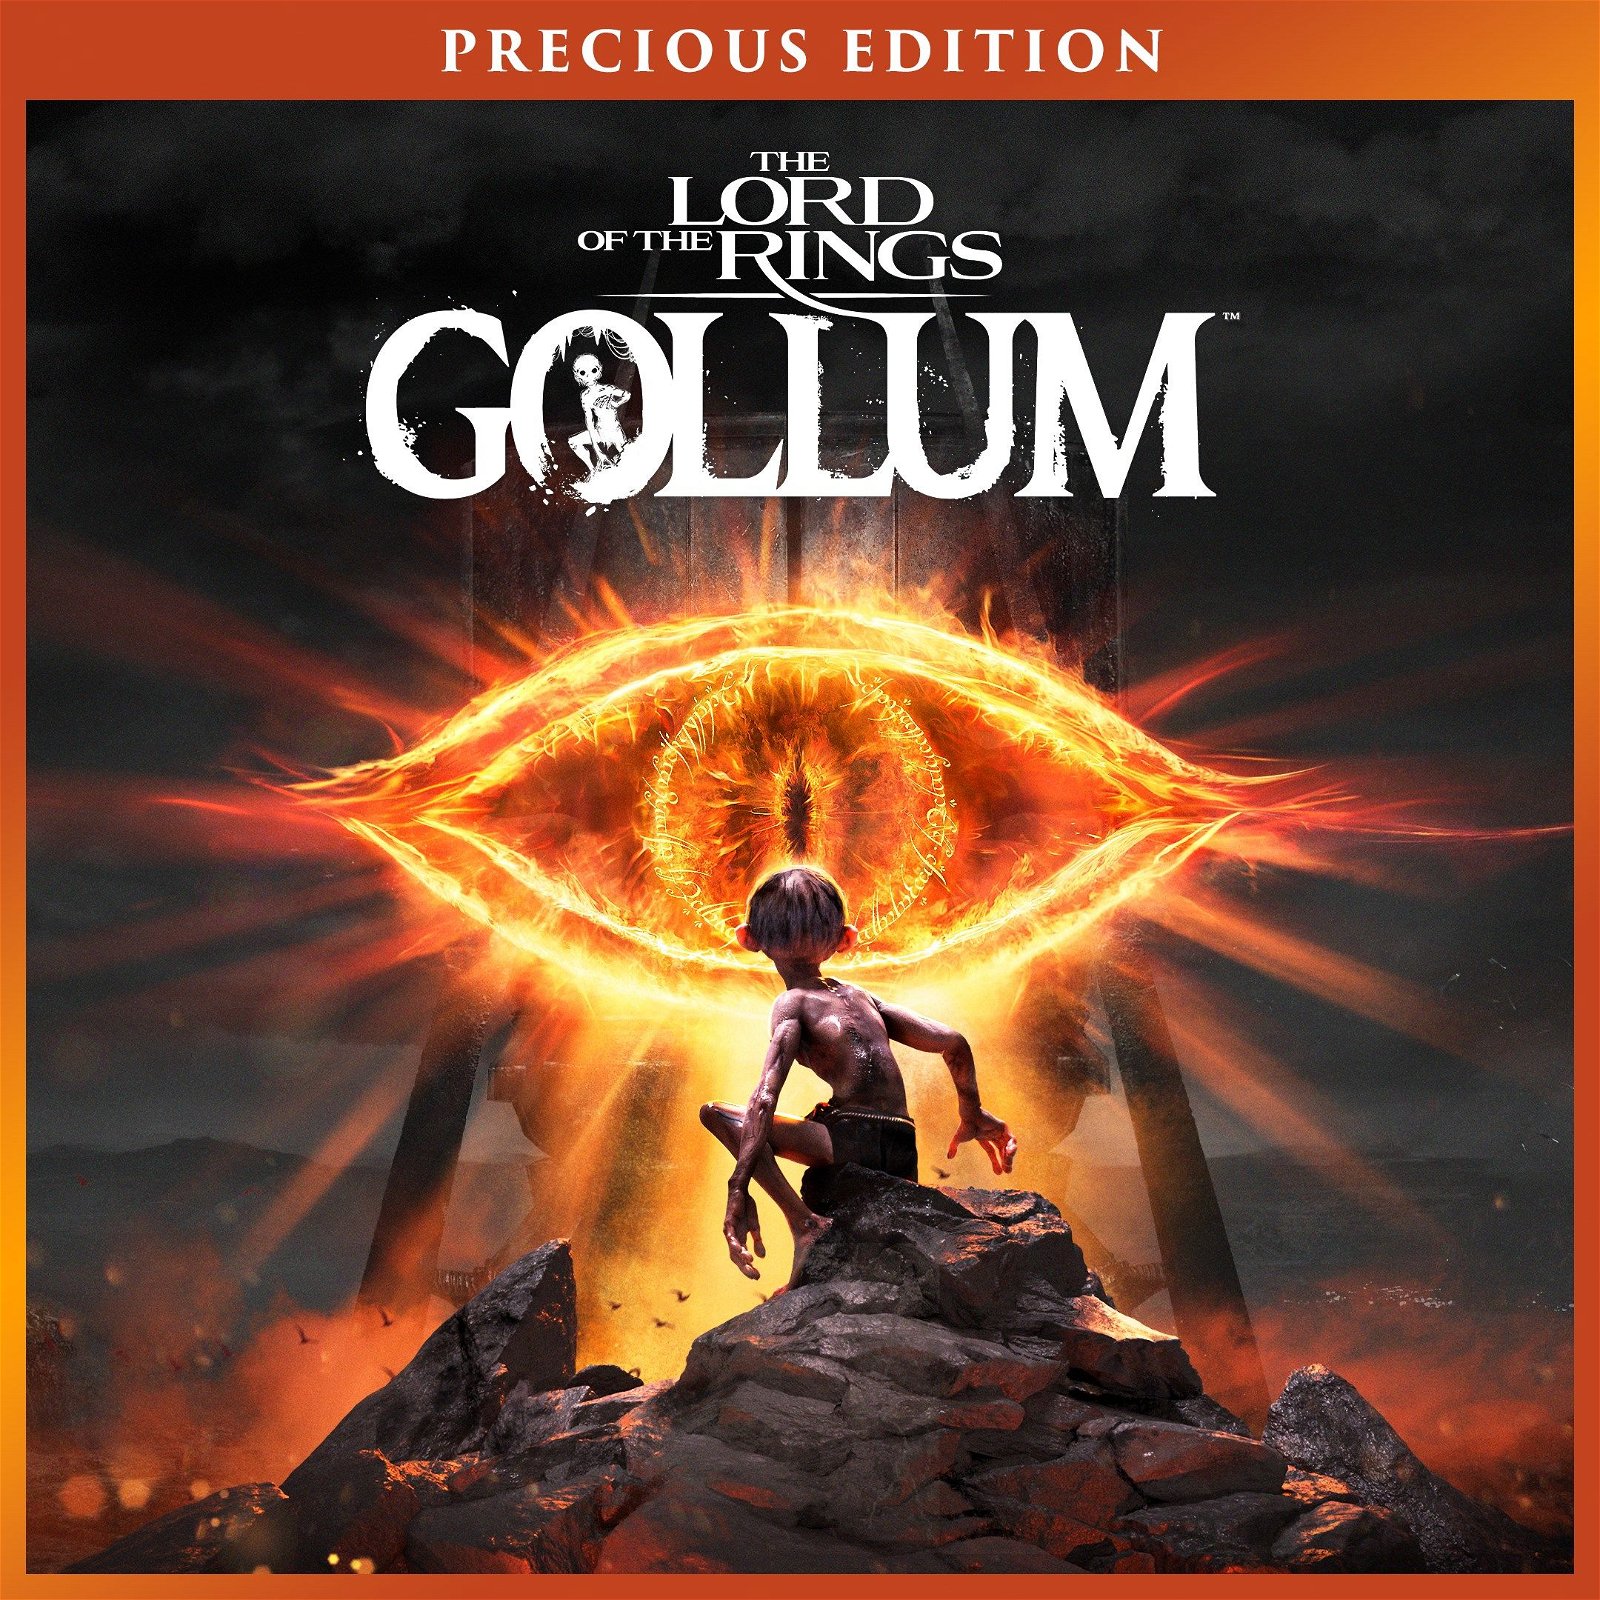 Image of The Lord of the Rings: Gollum - Precious Edition